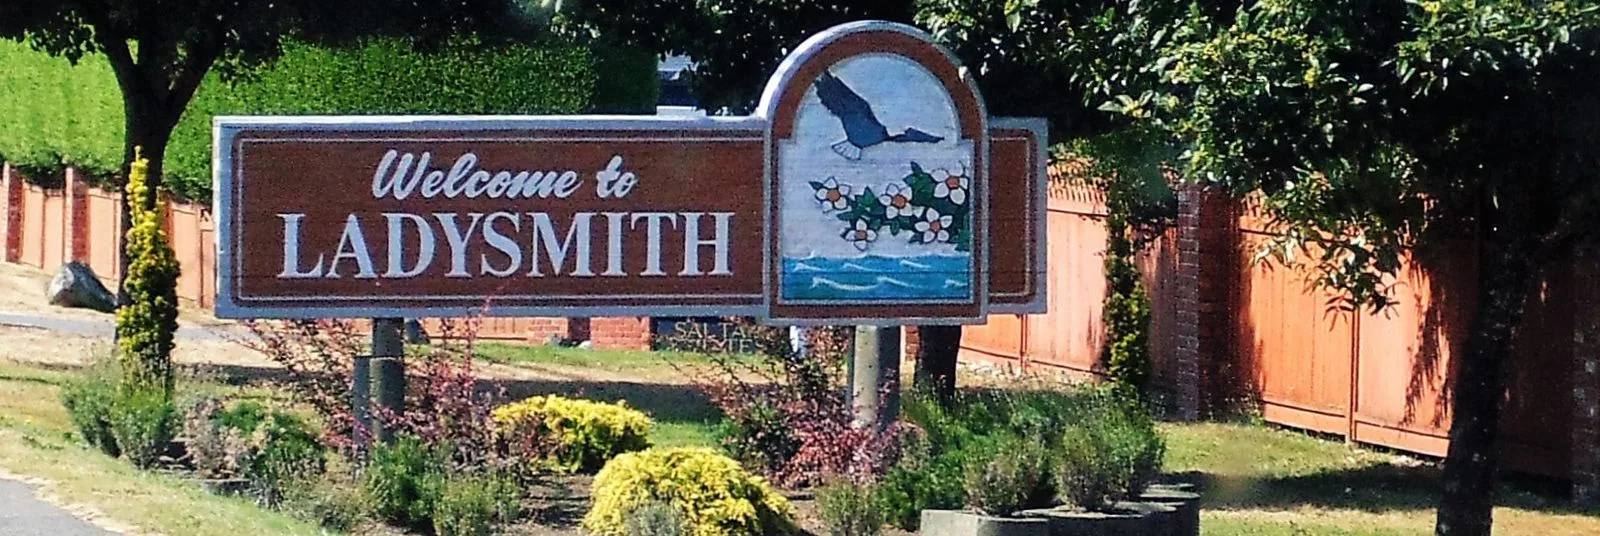 Ladysmith Welcome Sign -sliver